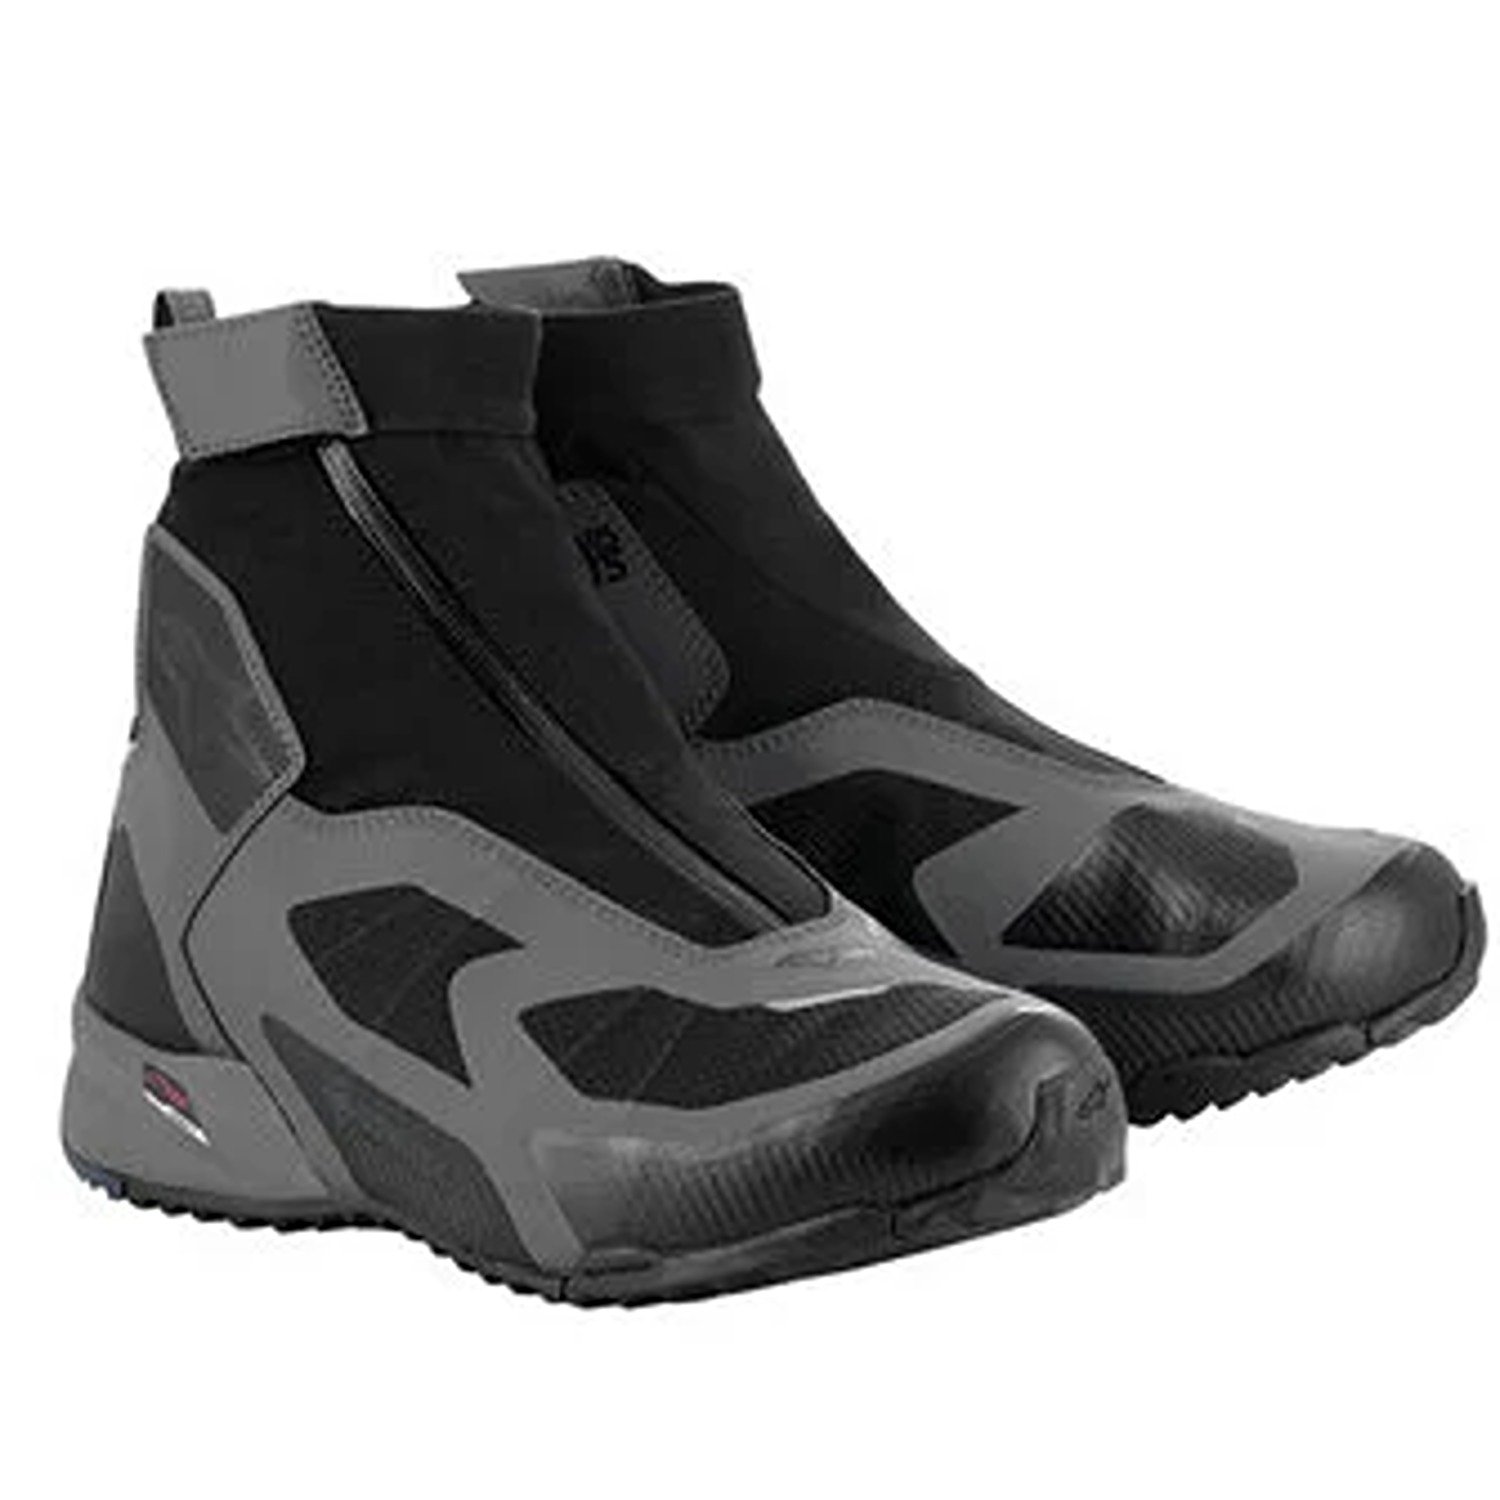 Image of Alpinestars CR-8 Gore-Tex Shoes Black Mid Gray Bright Red Size US 12 ID 8059347260235